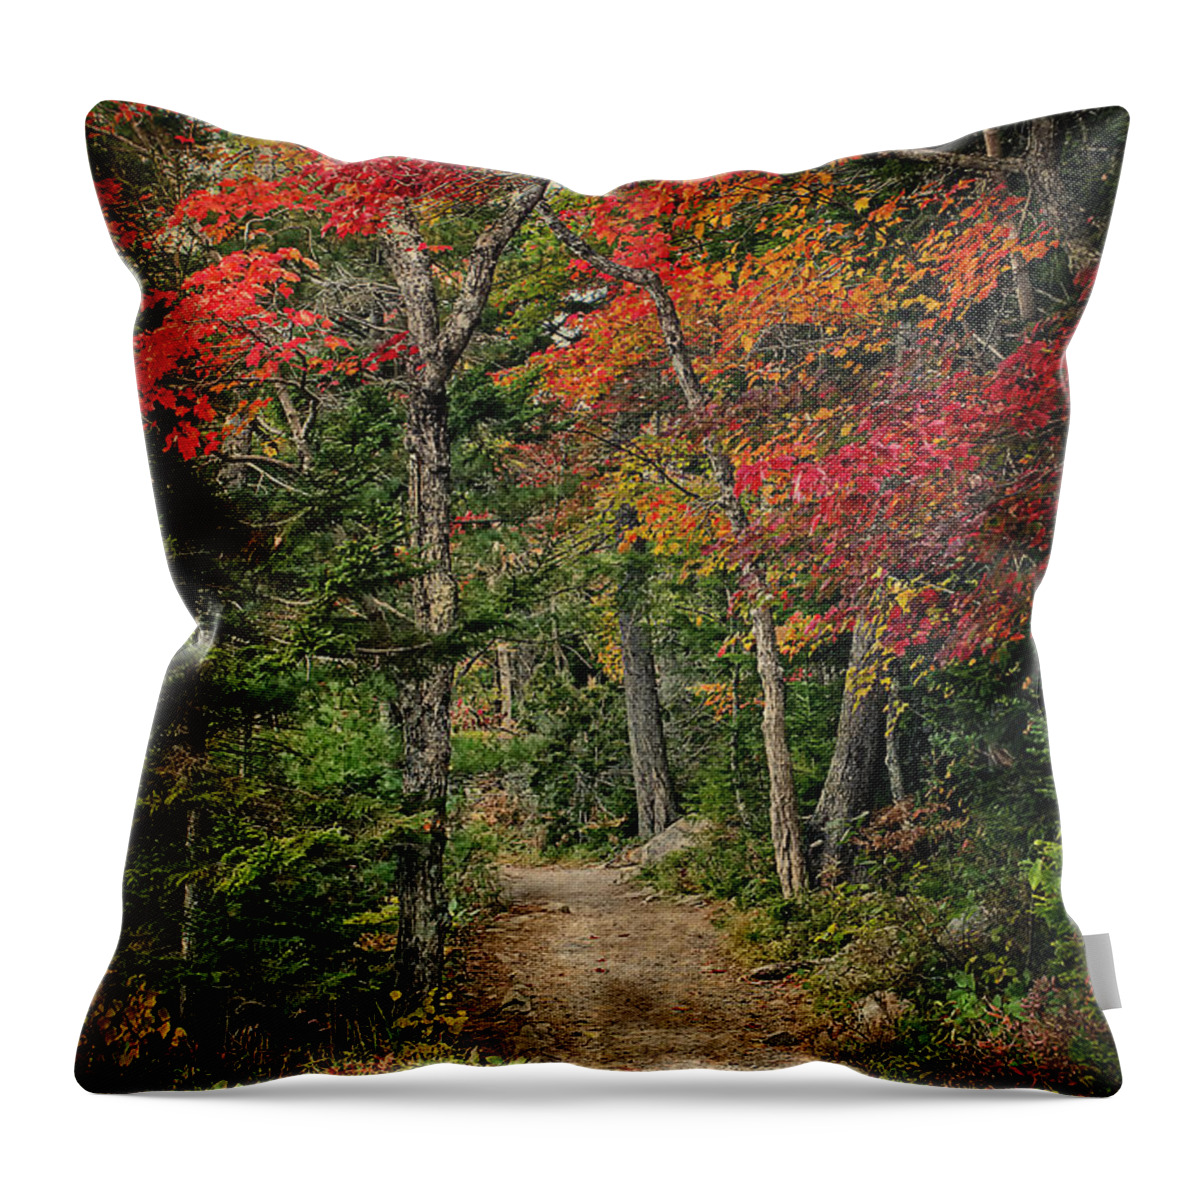 Autumn Throw Pillow featuring the photograph Come Walk with Me by Priscilla Burgers